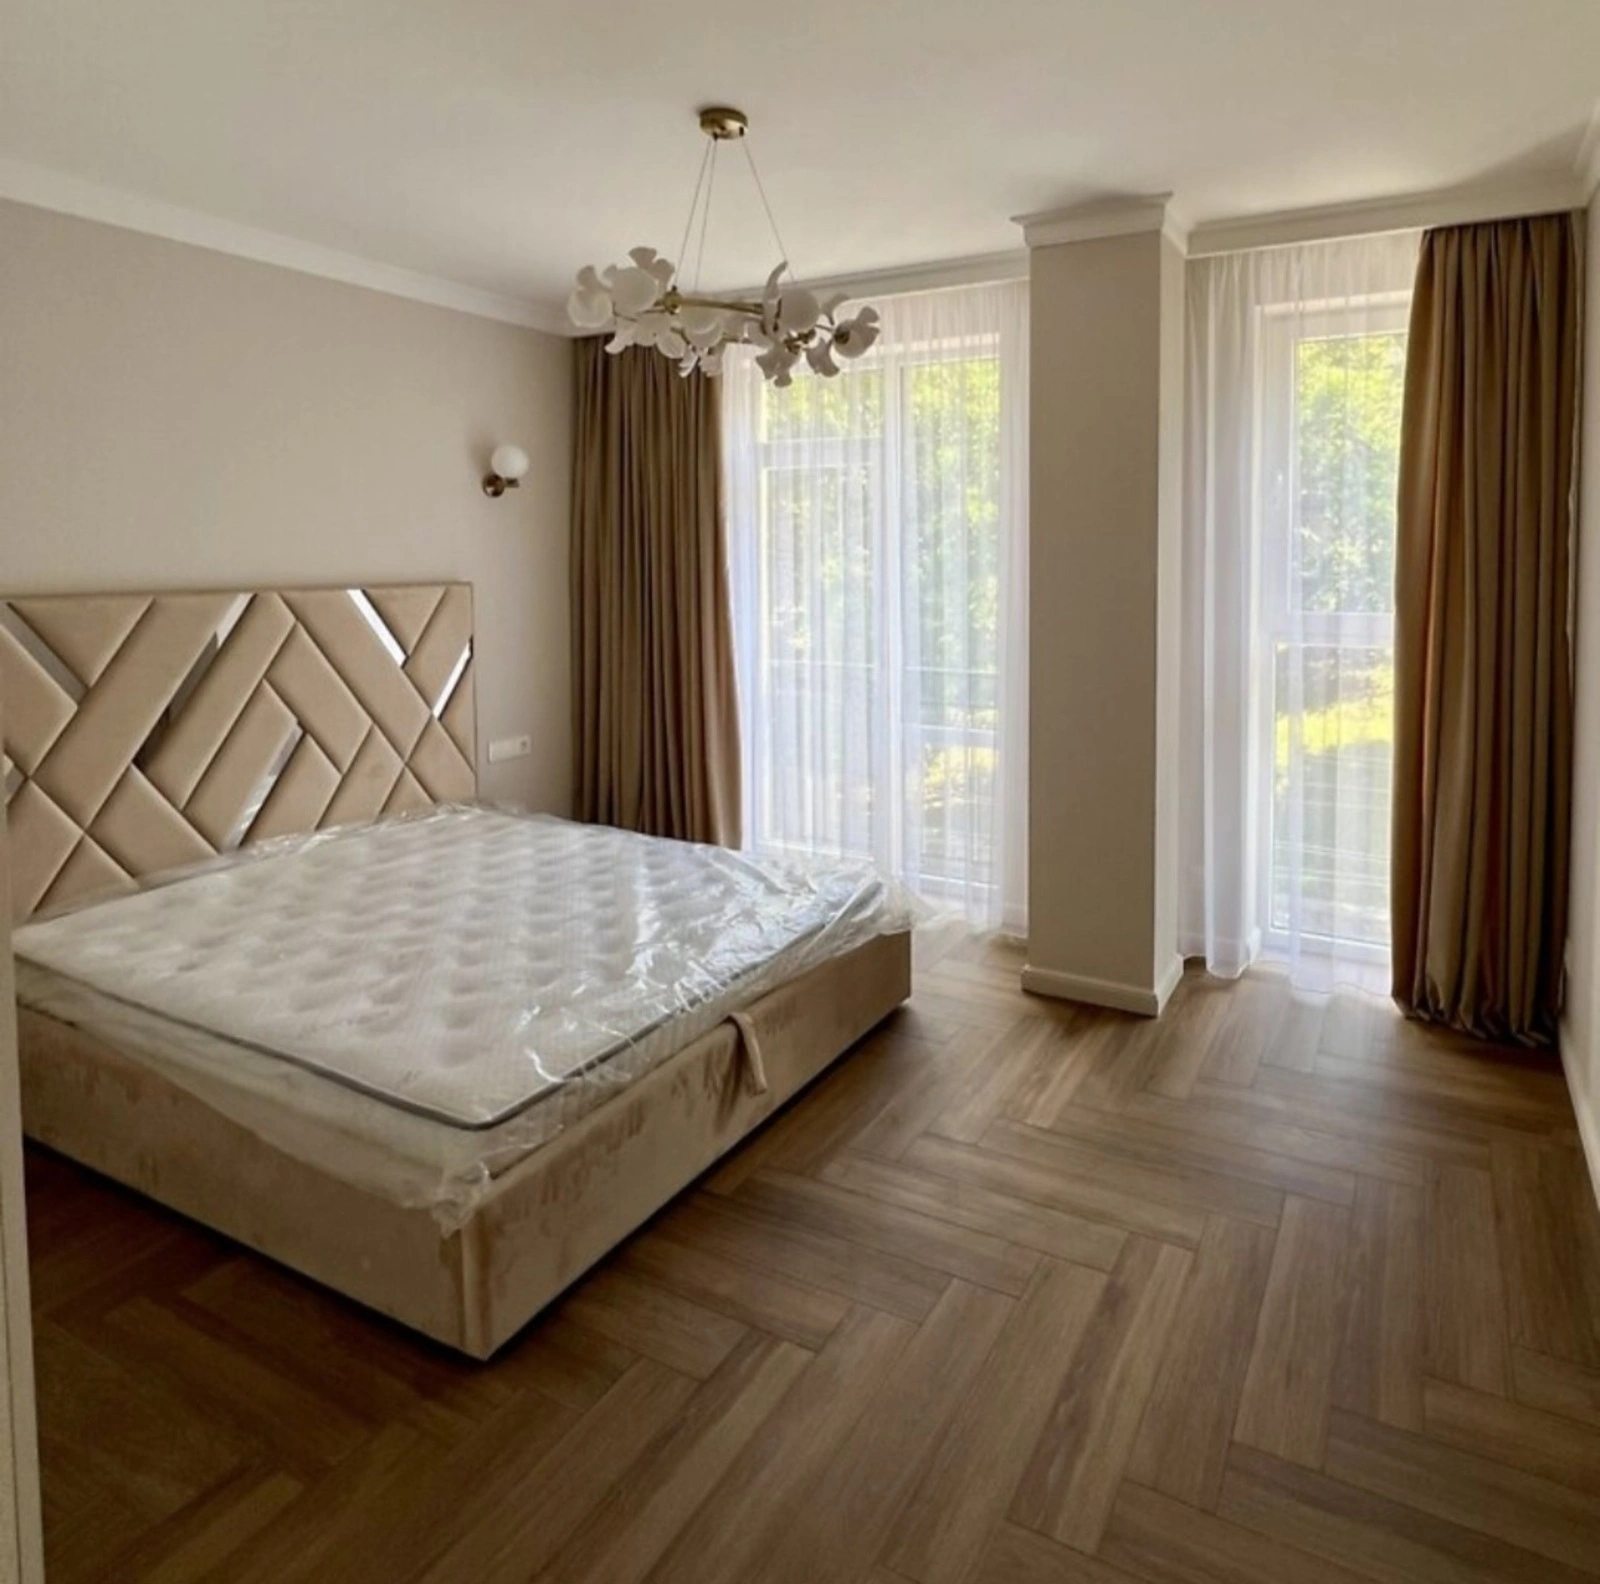 Apartments for sale. 2 rooms, 67 m², 3rd floor/5 floors. Tsentr, Ternopil. 